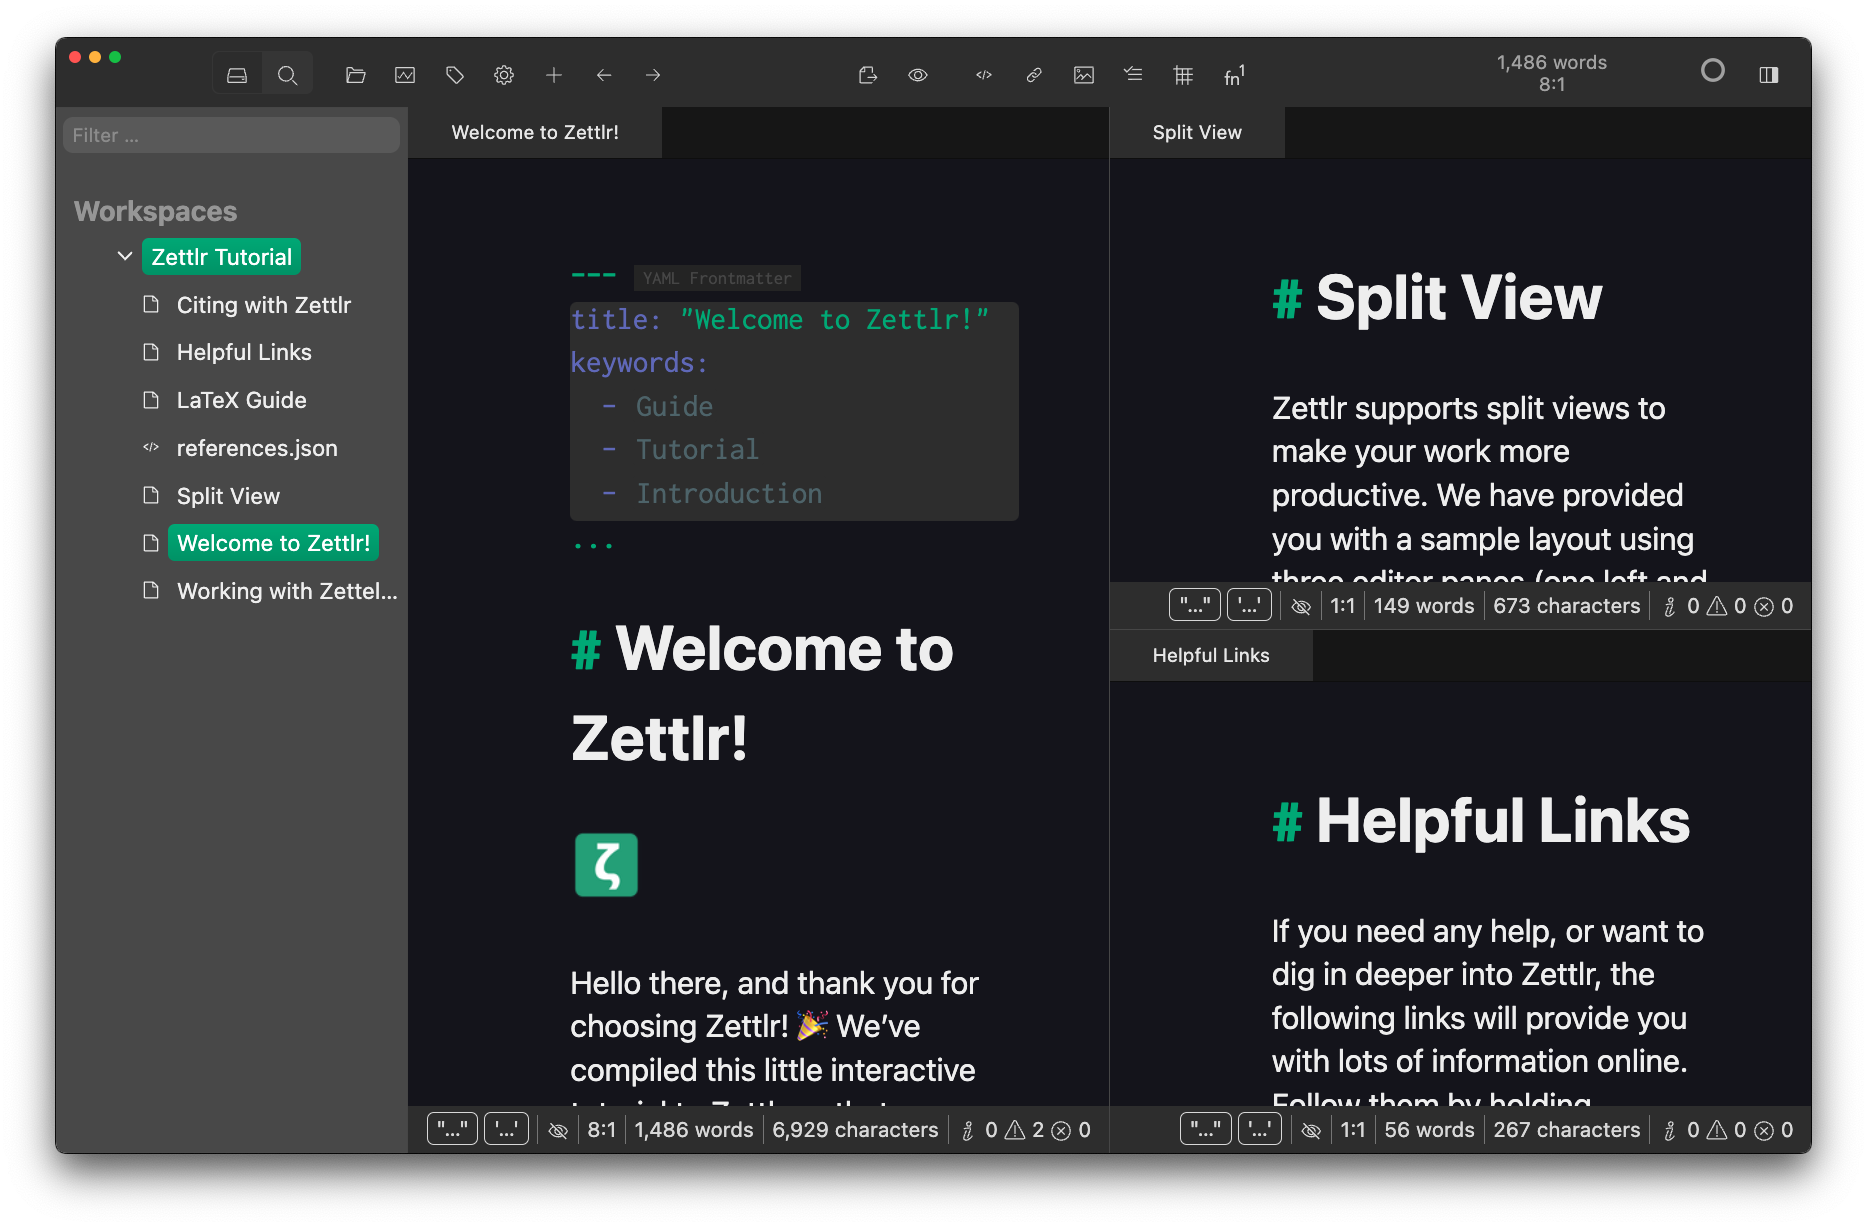 The central window of Zettlr using the dark theme